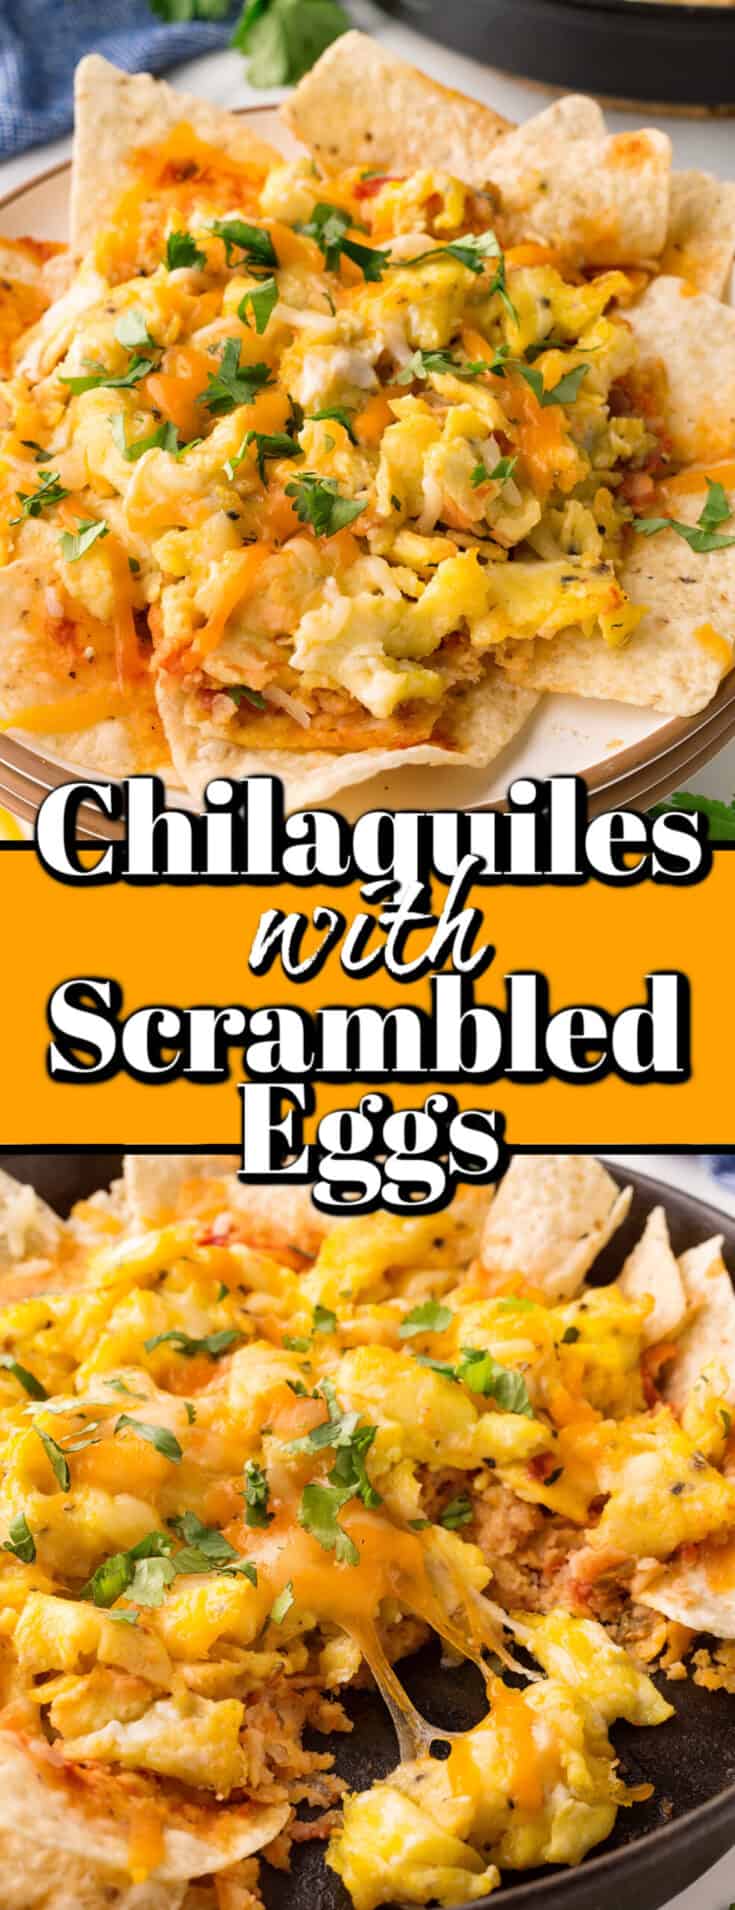 Chilaquiles With Scrambled Eggs